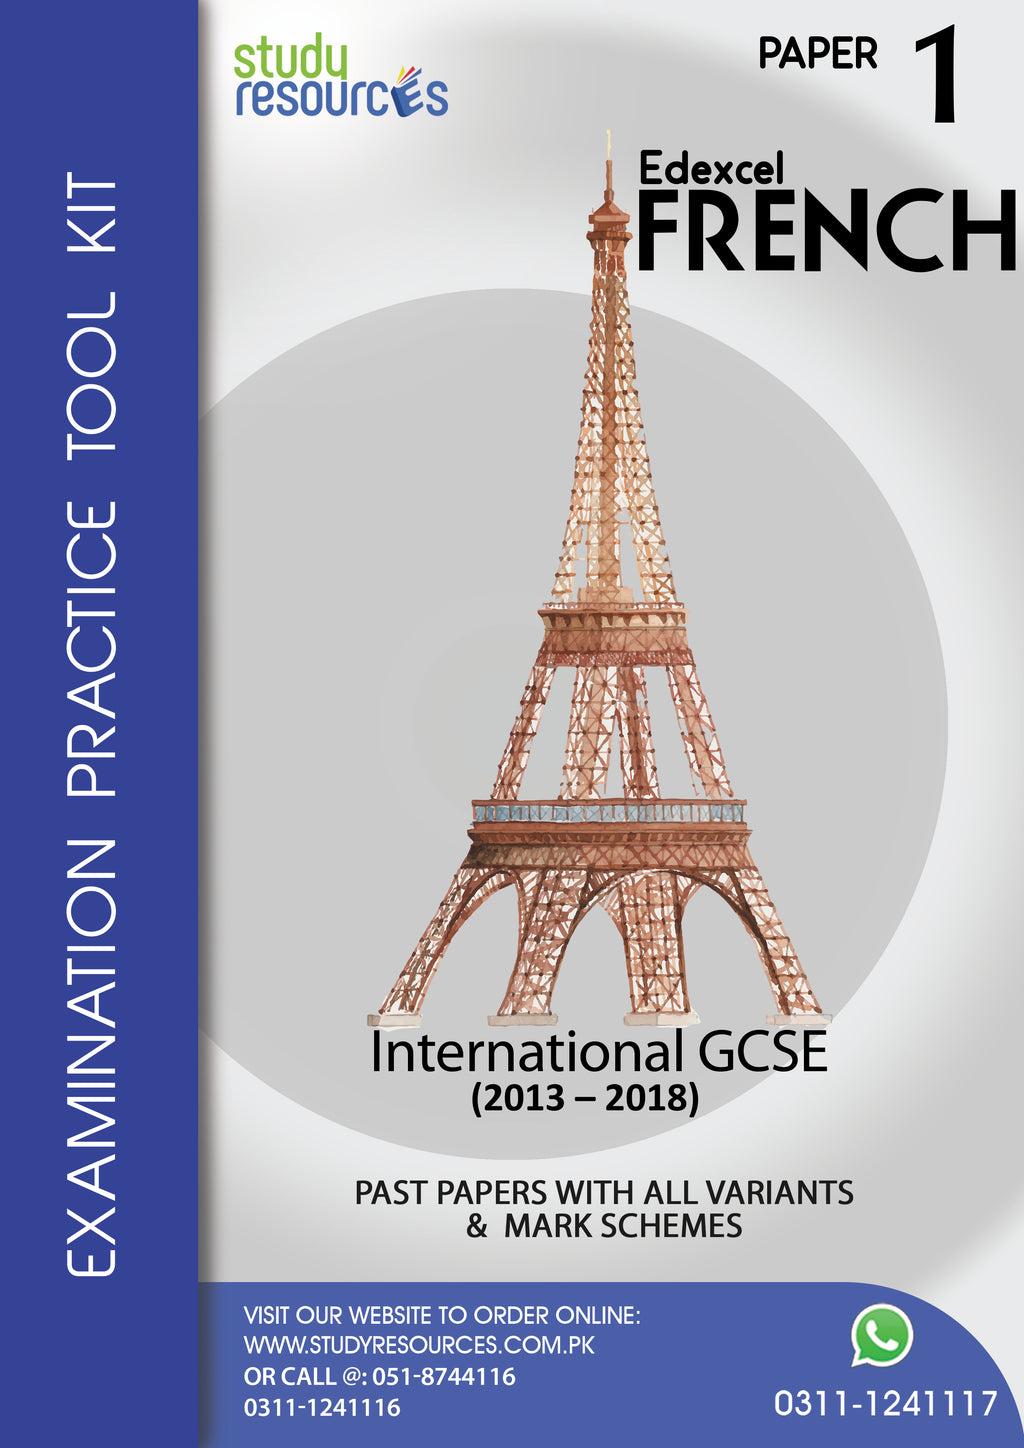 Edexcel IGCSE French P-1 Past Papers (2013-2018)